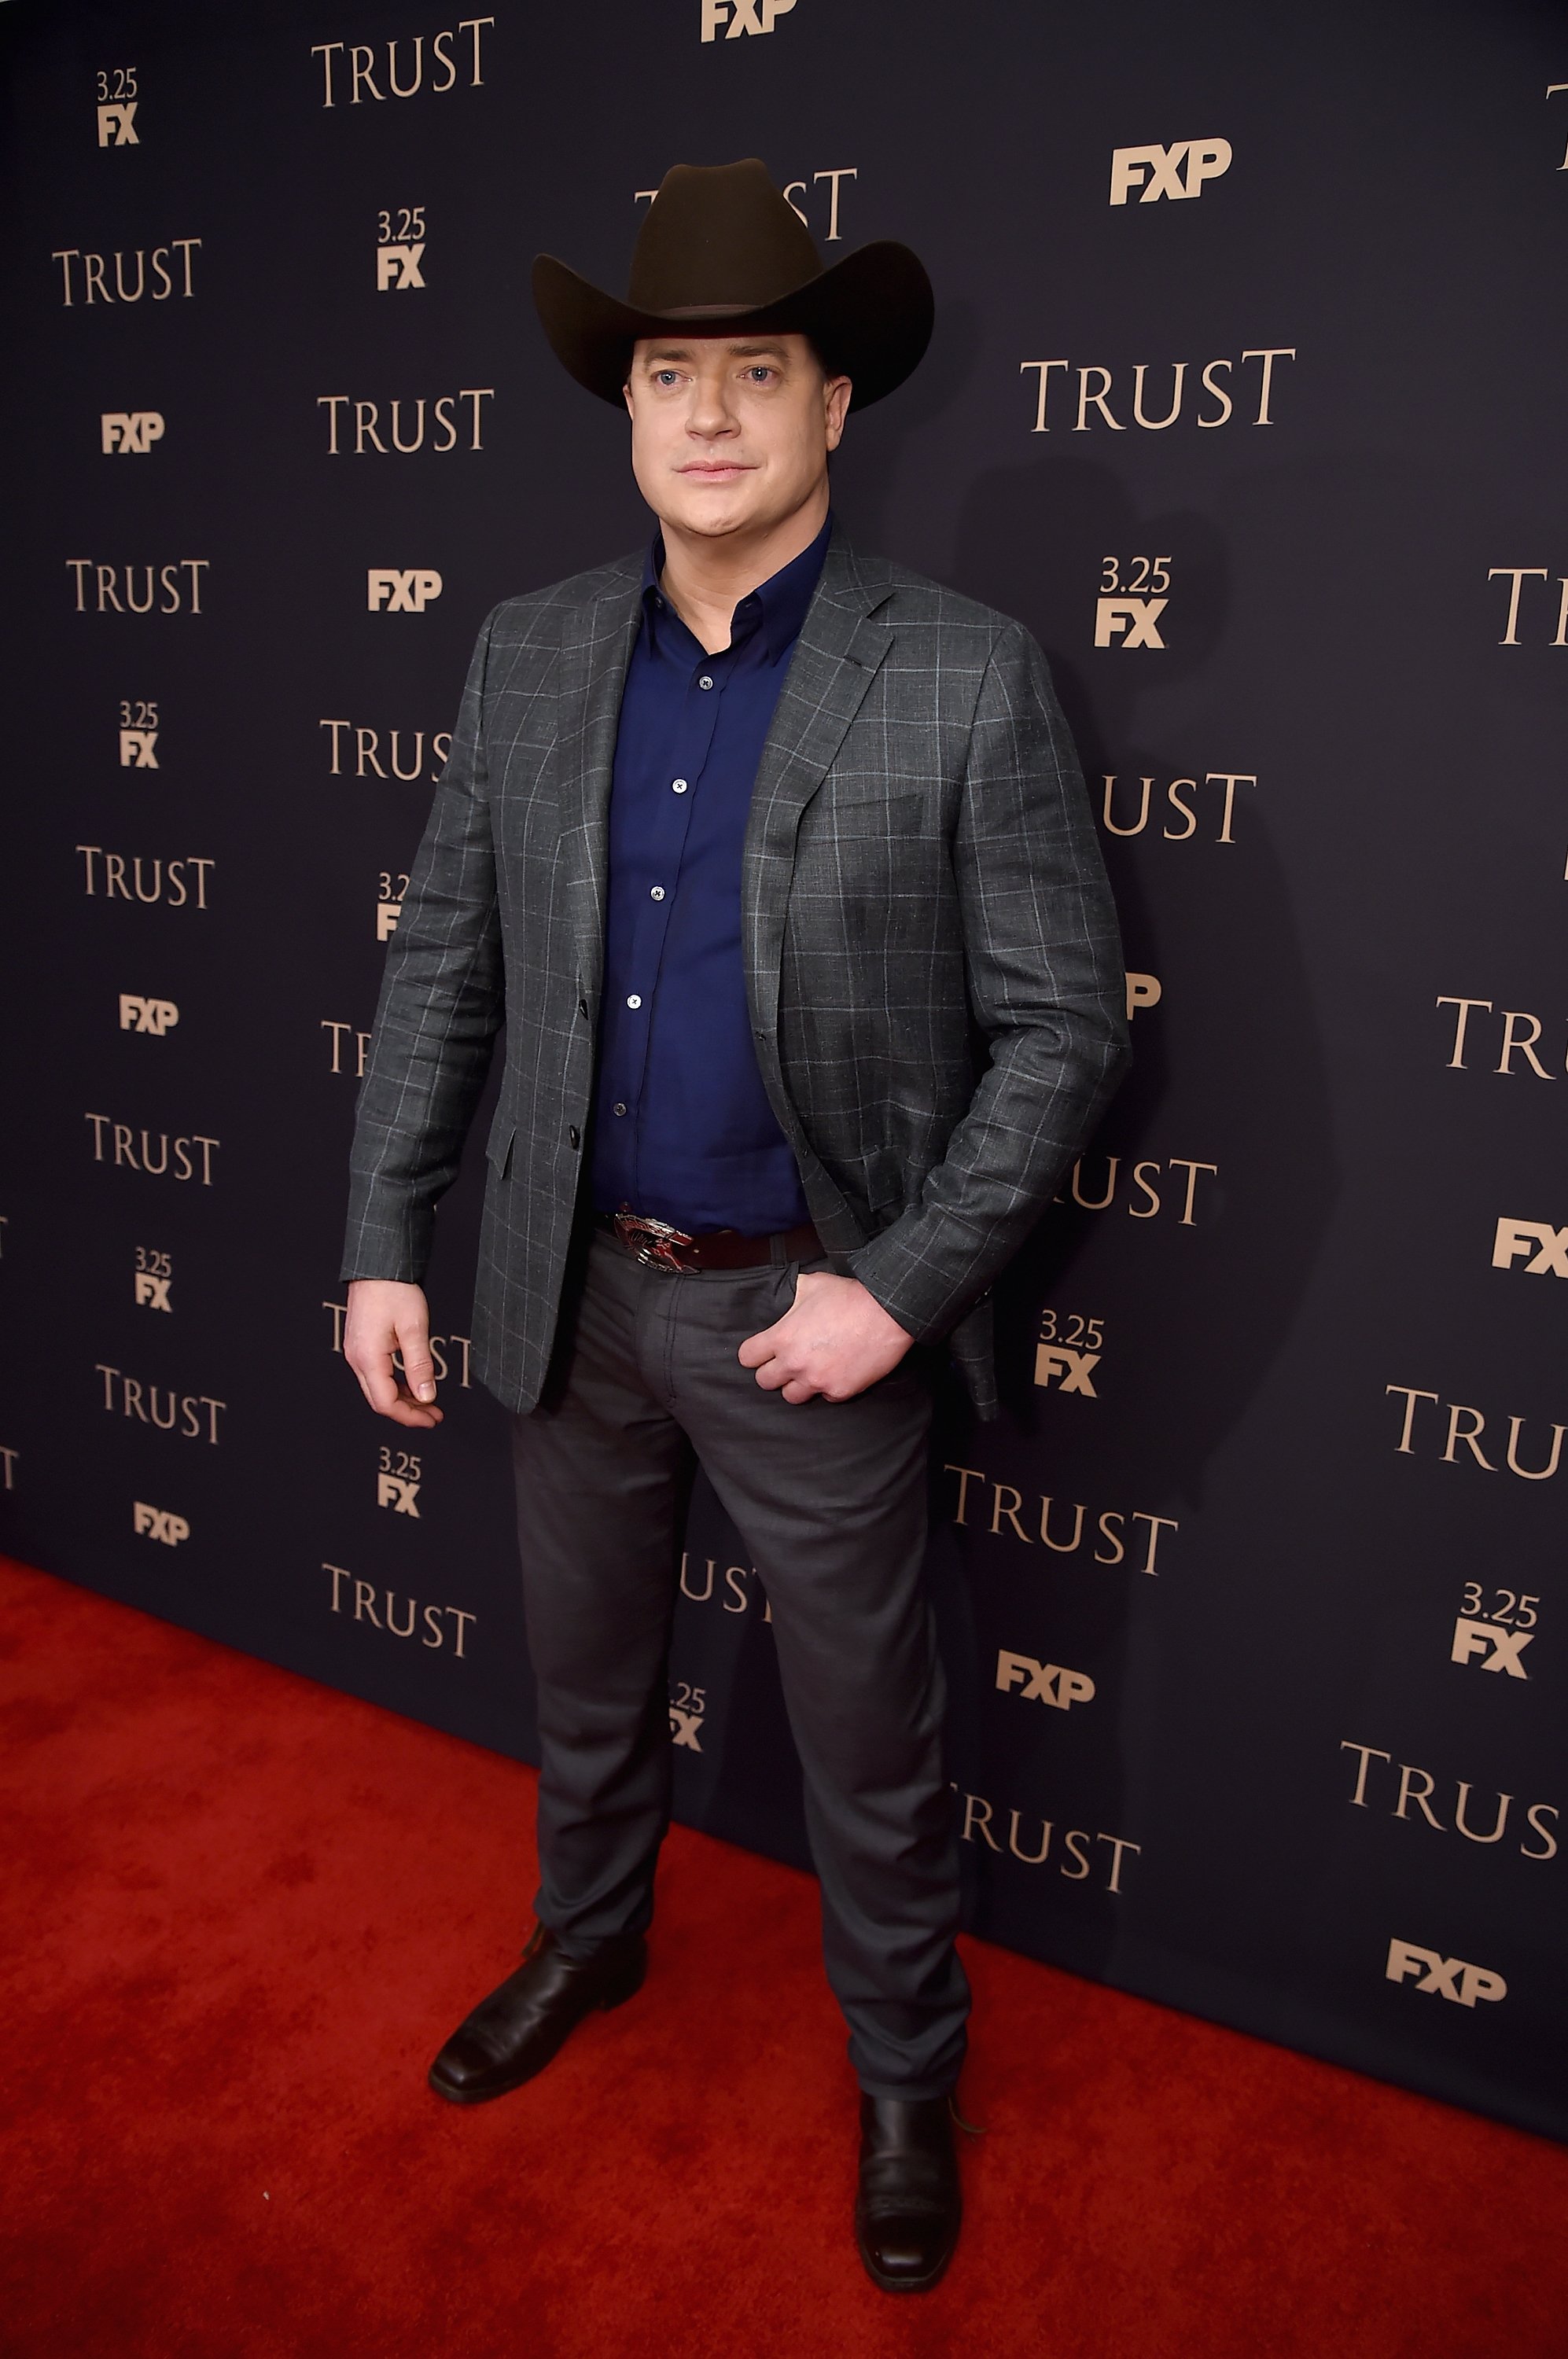 Brendan Fraser attends the 2018 FX Annual All-Star Party at SVA Theater on March 15, 2018 | Photo: Getty Images